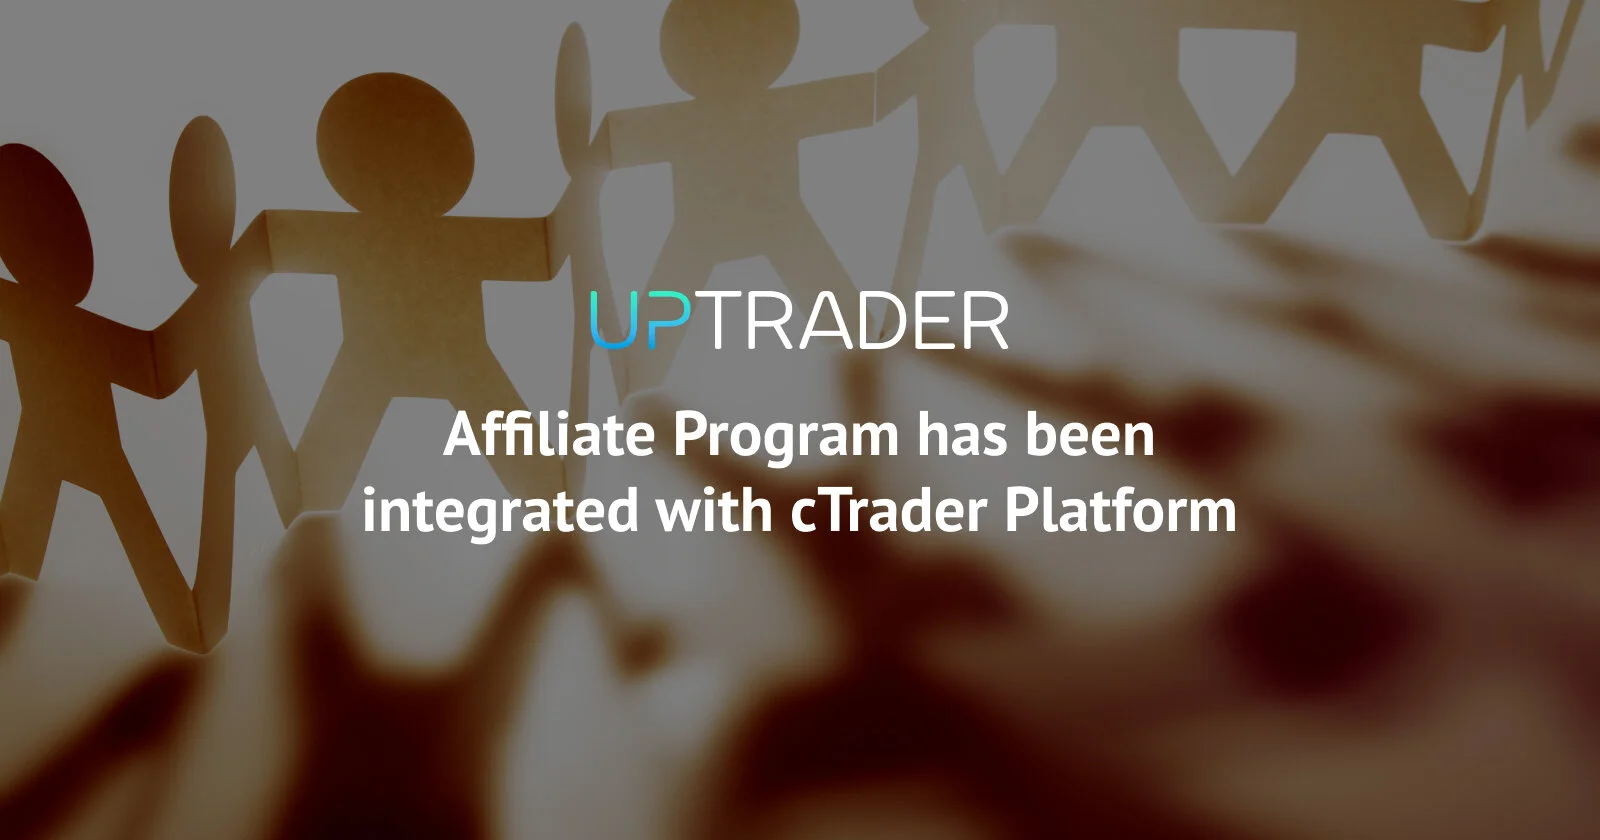 The Affiliate Program in UpTrader Forex CRM has been integrated with the cTrader Platform